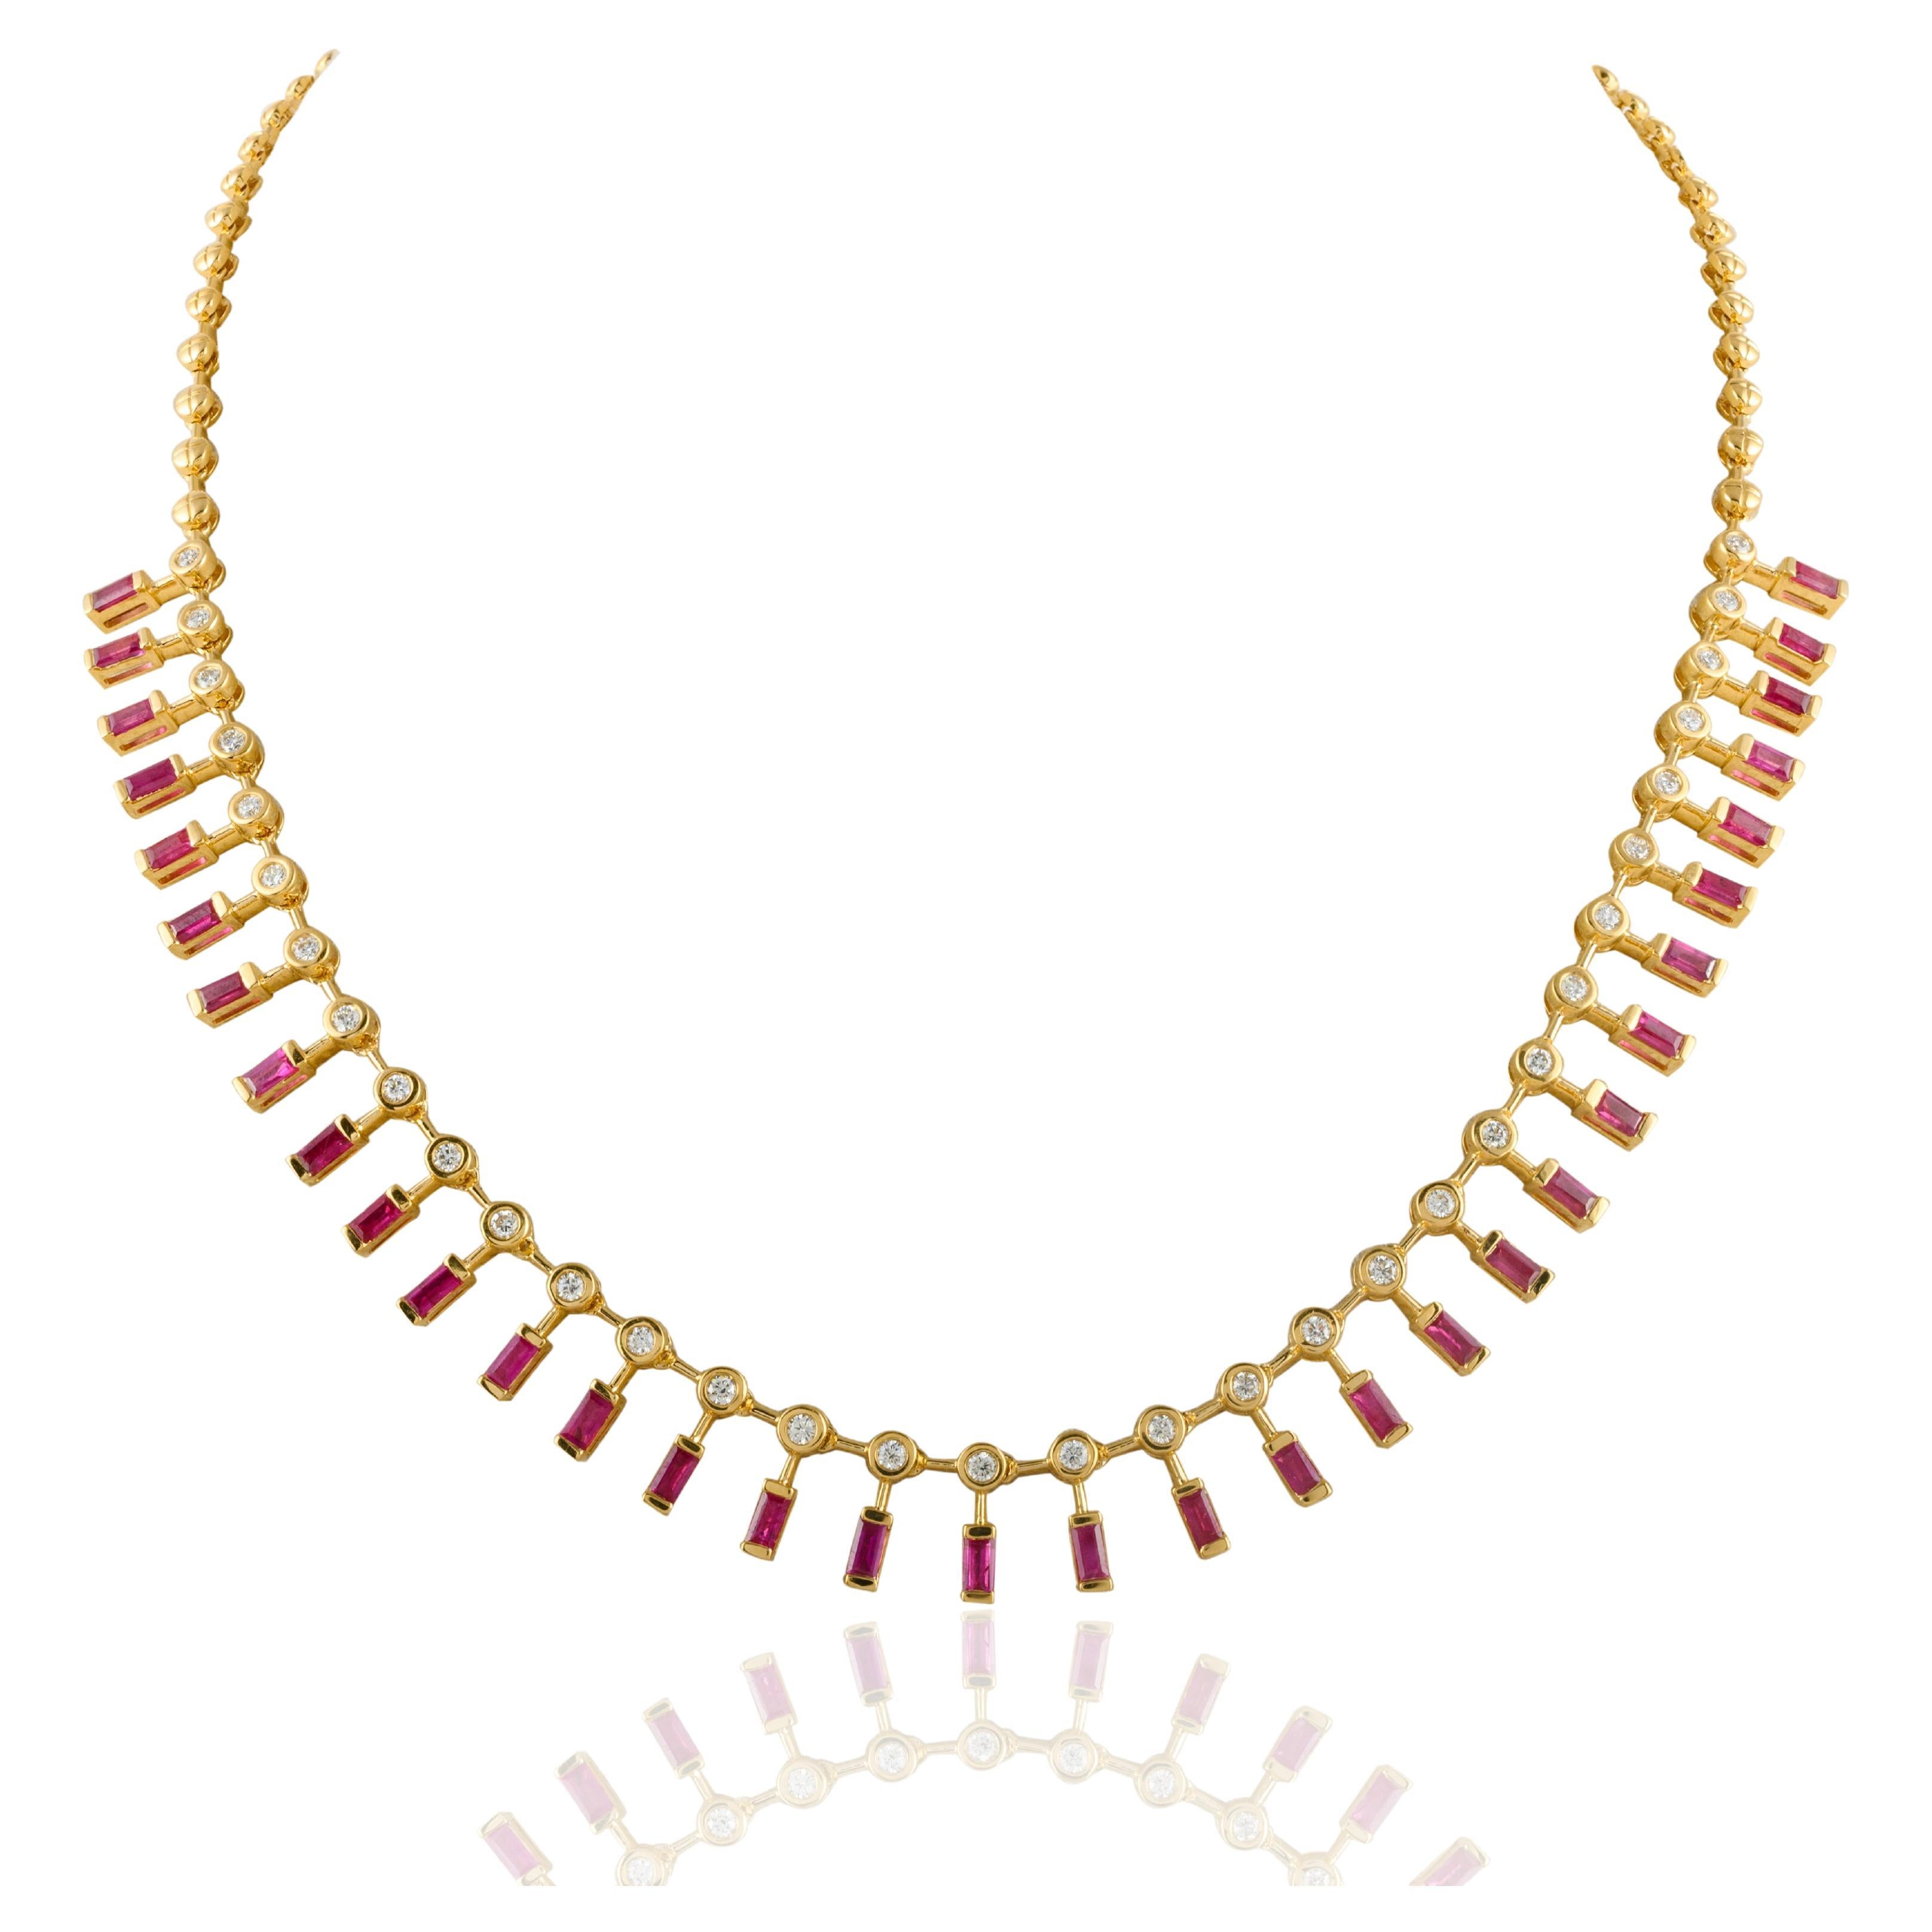 Twinkling 4.12 Carat Ruby Diamond Necklace 18kt Solid Yellow Gold, Grandma Gift